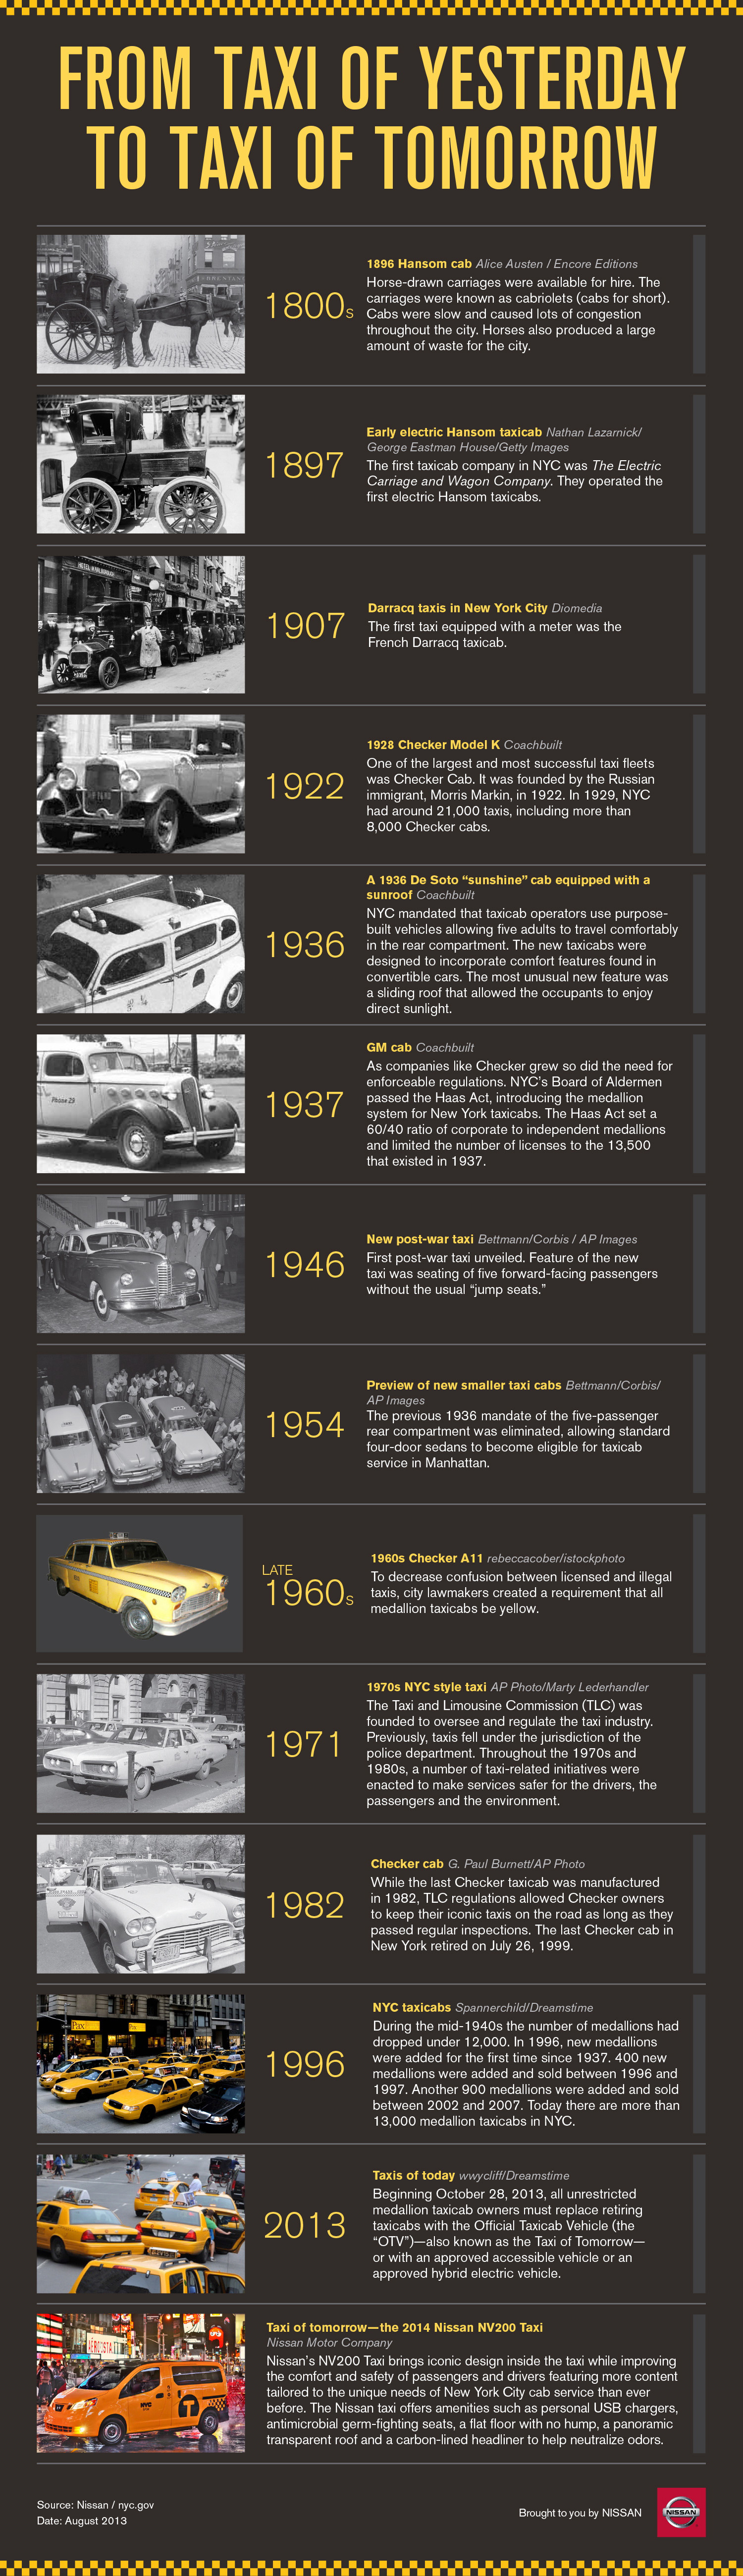 INFOGRAPHIC: From Taxi of Yesterday to Taxi of Tomorrow